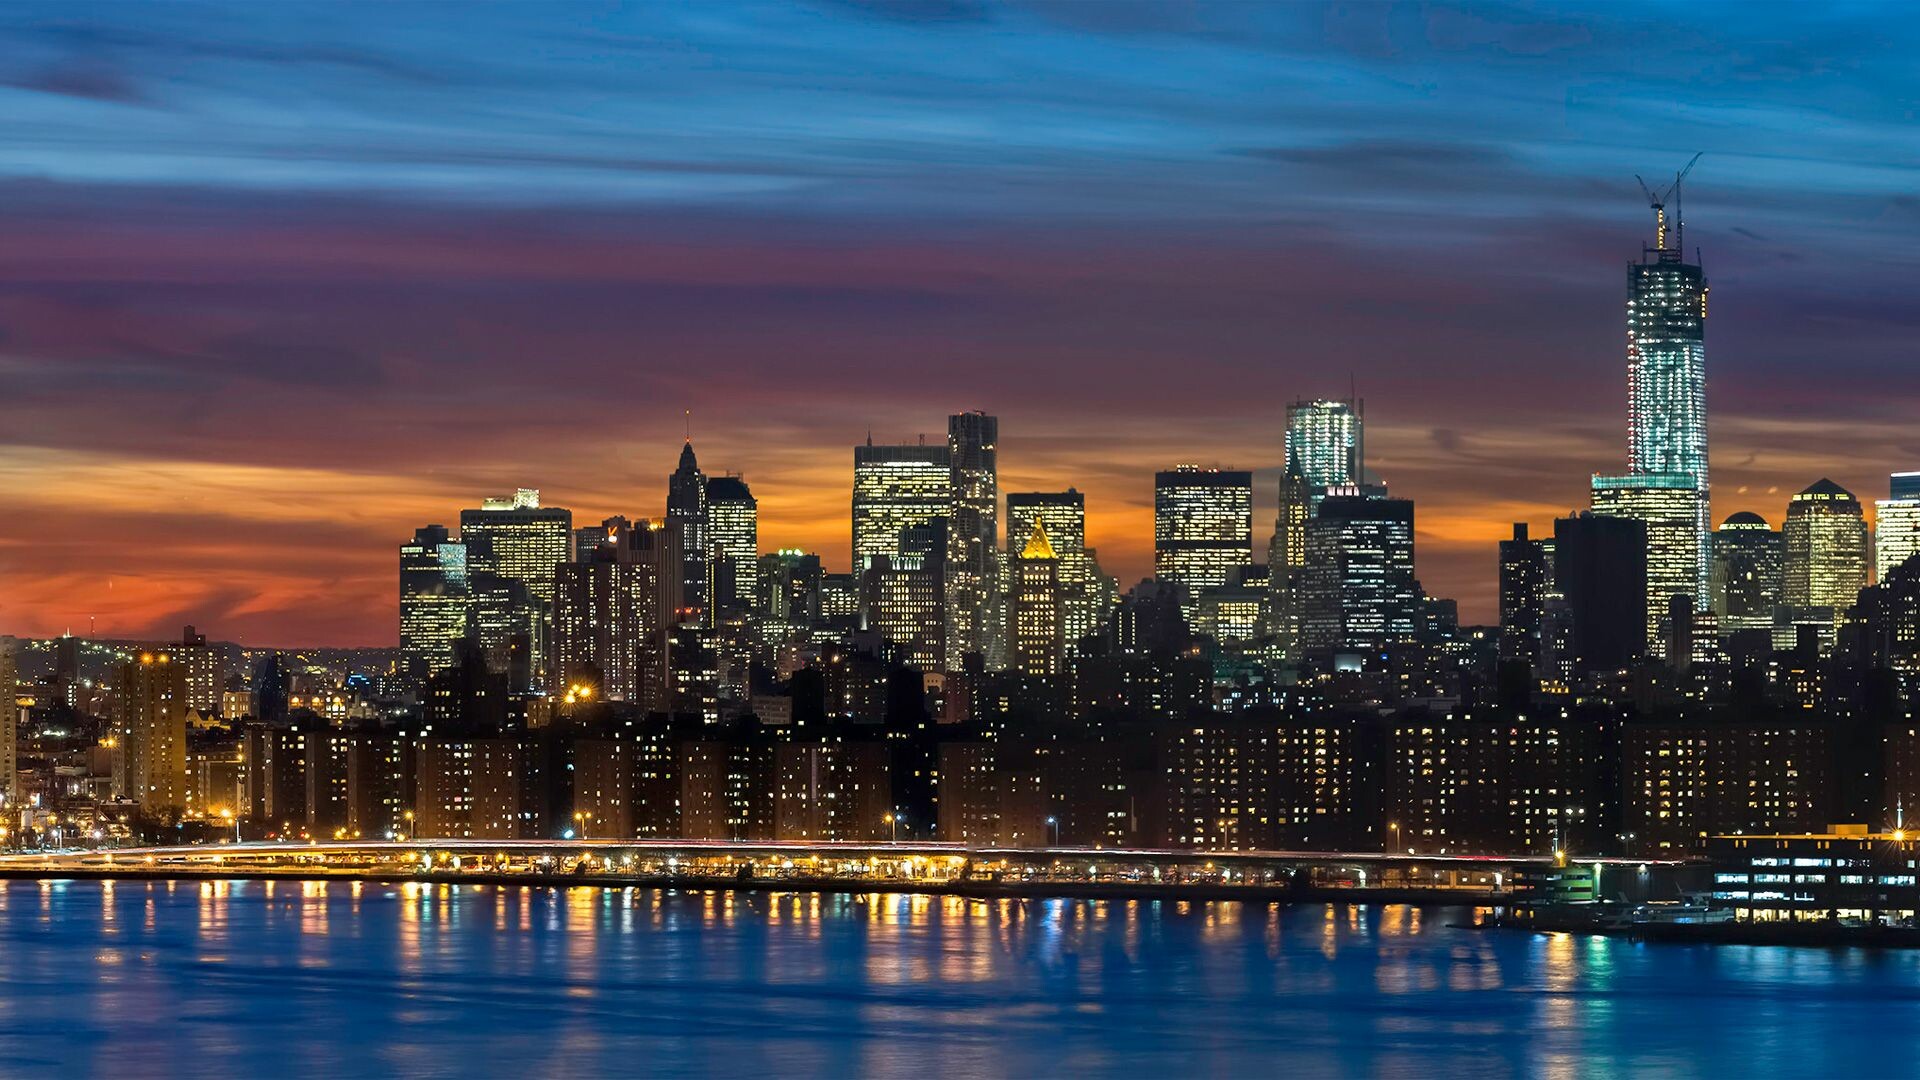 72+ New York HD Wallpapers: HD, 4K, 5K for PC and Mobile | Download